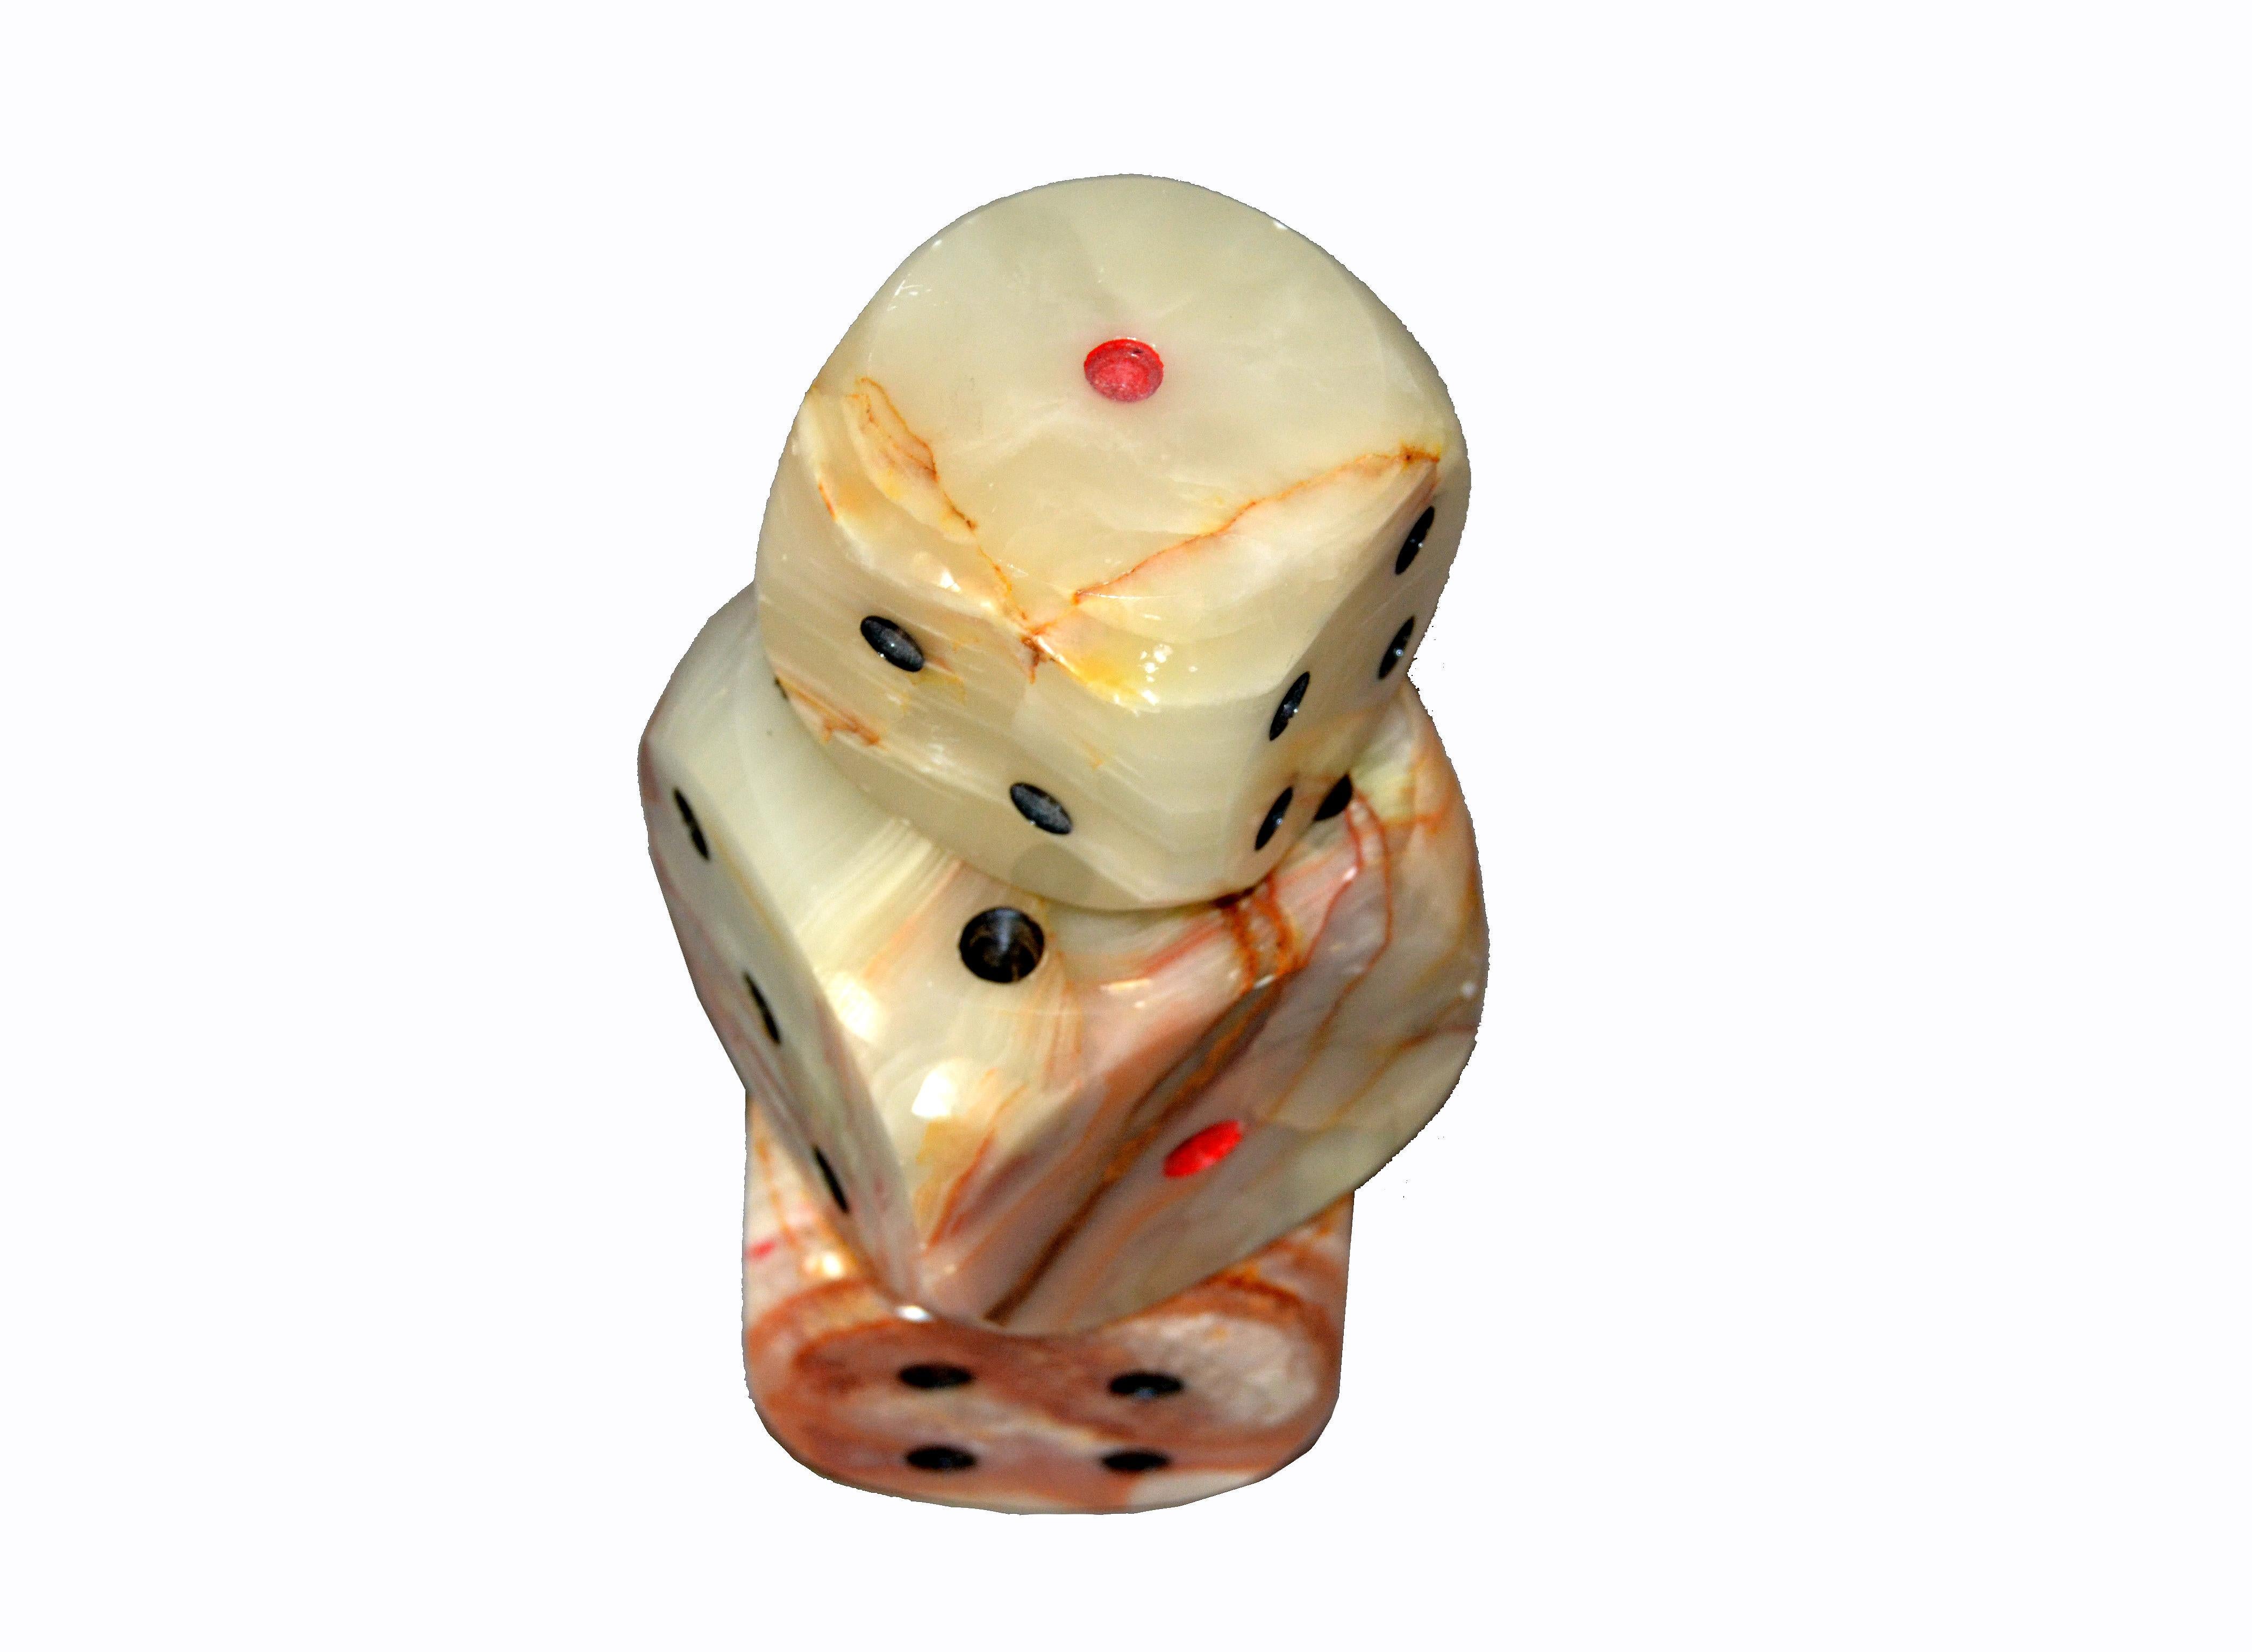 Set of 3 Oversized Mid-Century Modern Handcrafted Marble & Onyx Dice Sculptures For Sale 3